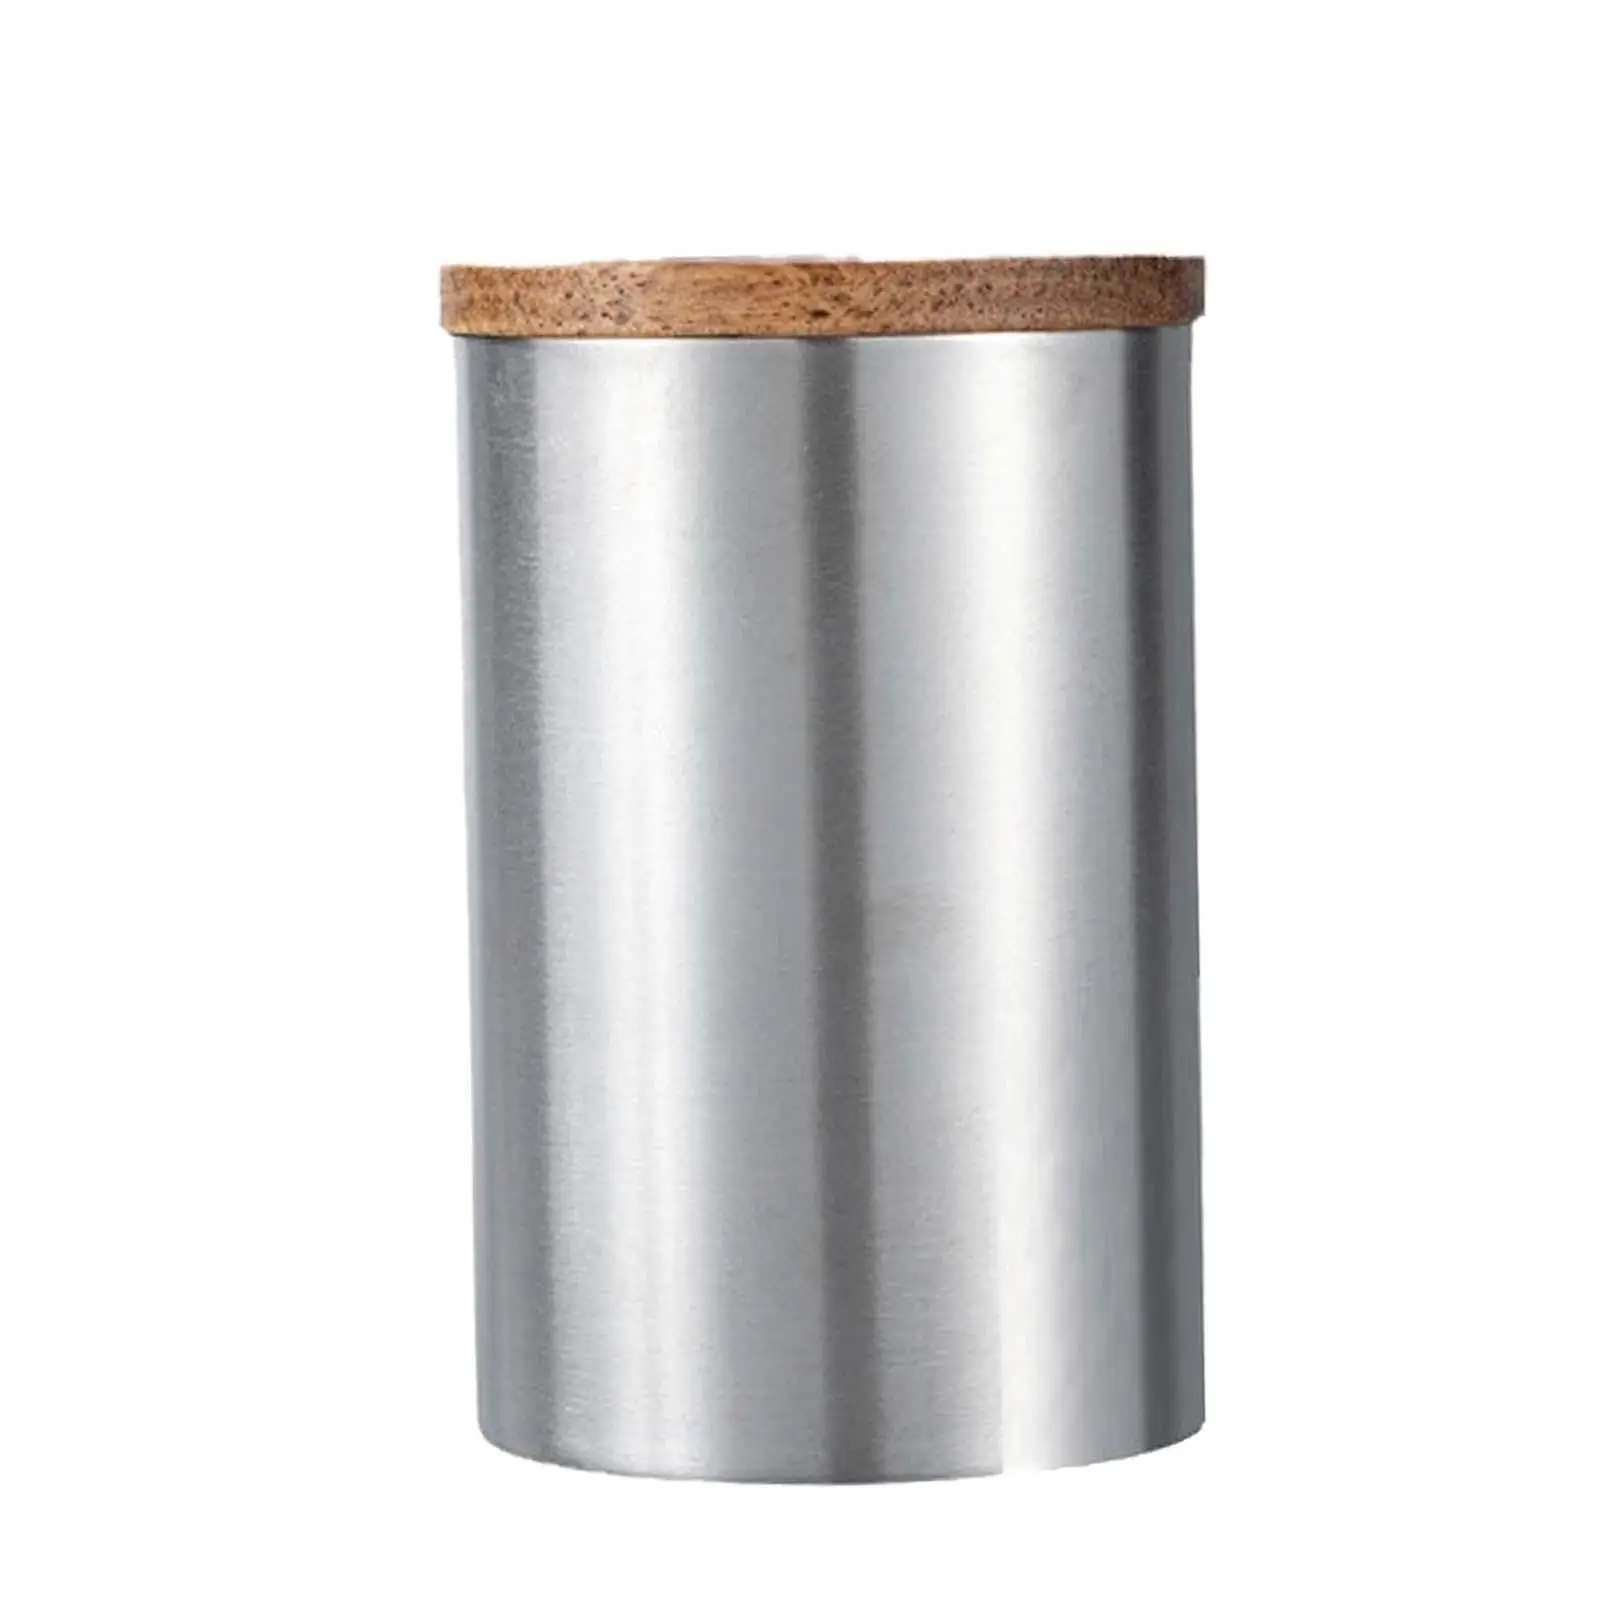 Airtight Coffee Canister 250ml with Wood Lid for Snacks Coffee Bean Cereal